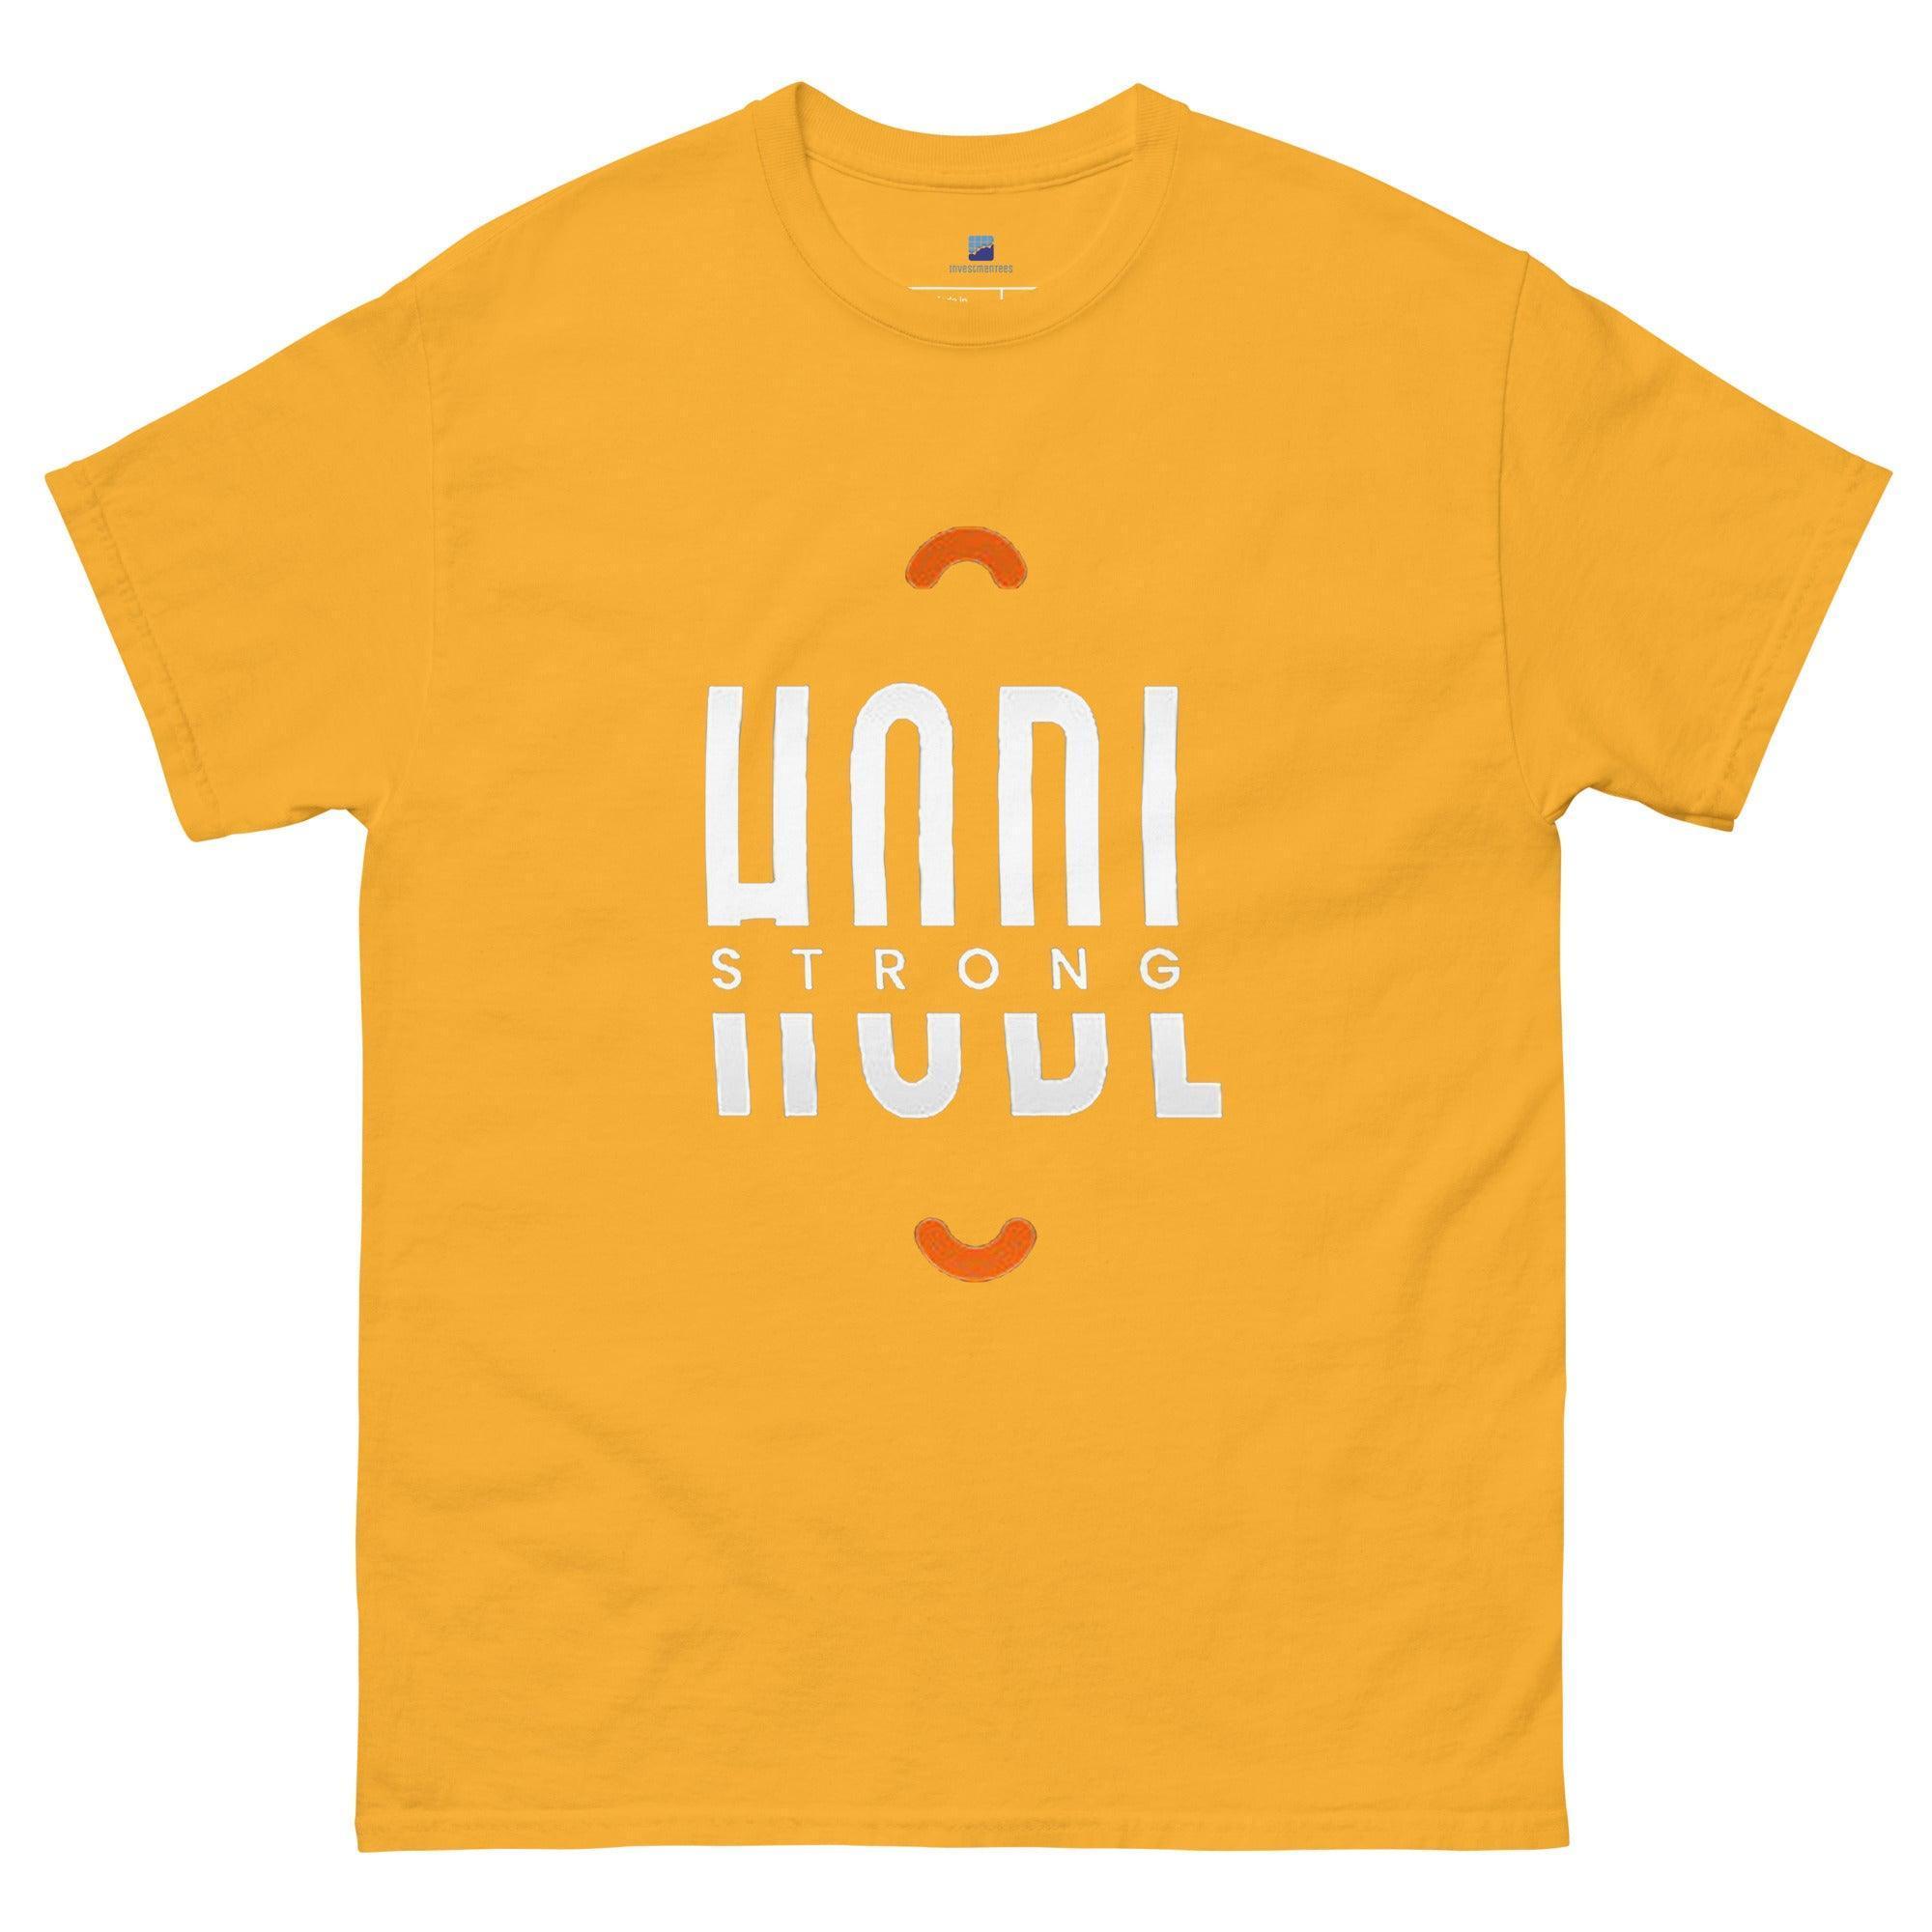 HODL Strong T-Shirt - InvestmenTees